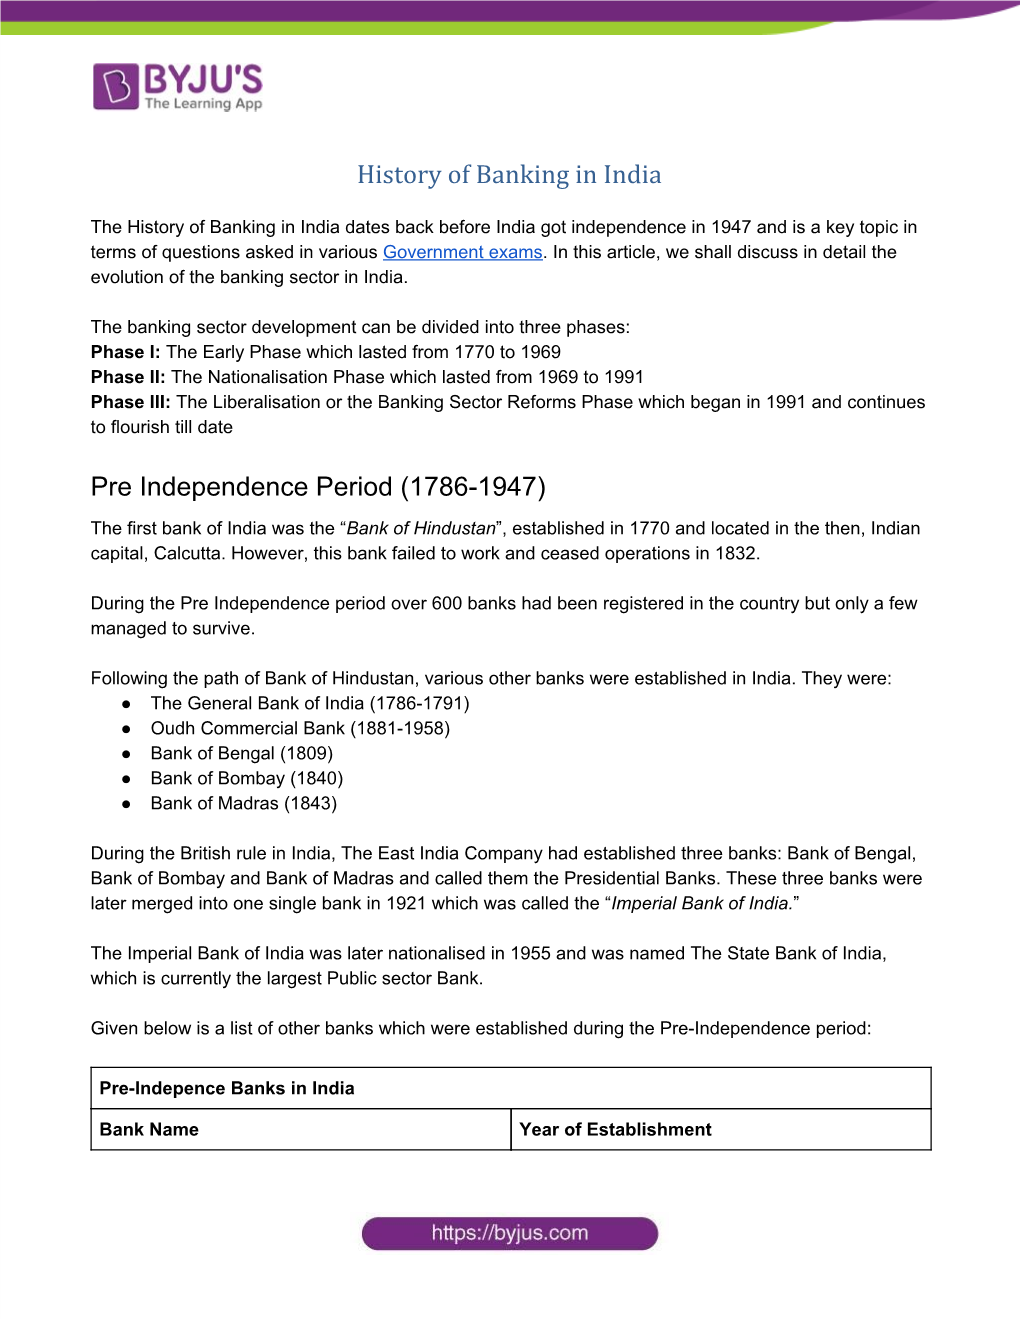 History of Banking in India Pre Independence Period